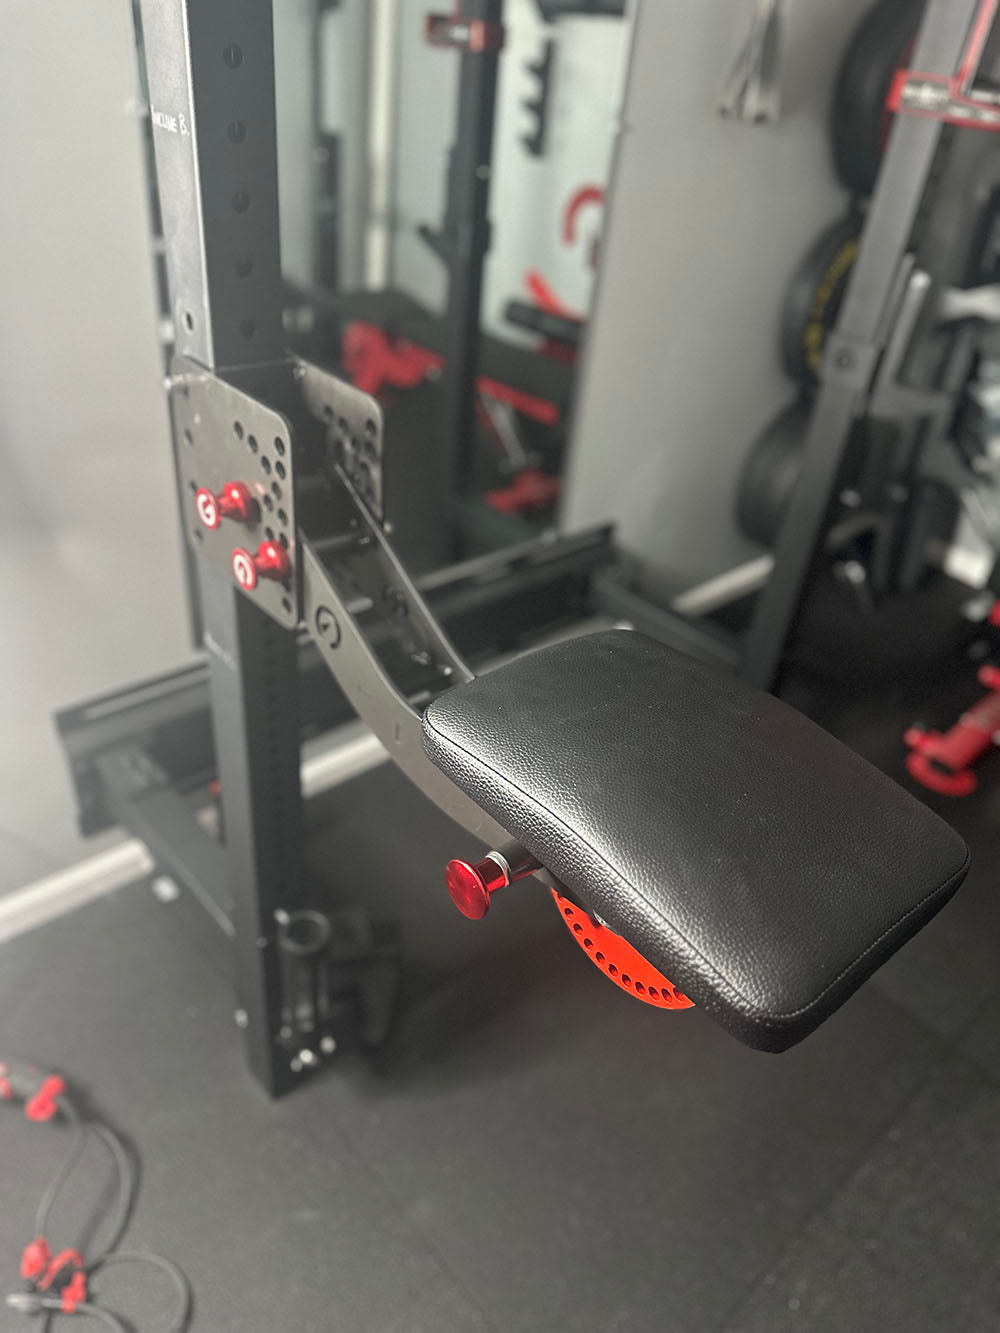 The rack-attaching, Infinity Arm can be utilized for chest-supported, arm-supported, back-supported, head-supported, and many other supported exercises. This image presents the Infinity Arm from an upper view connected to a workout rack.